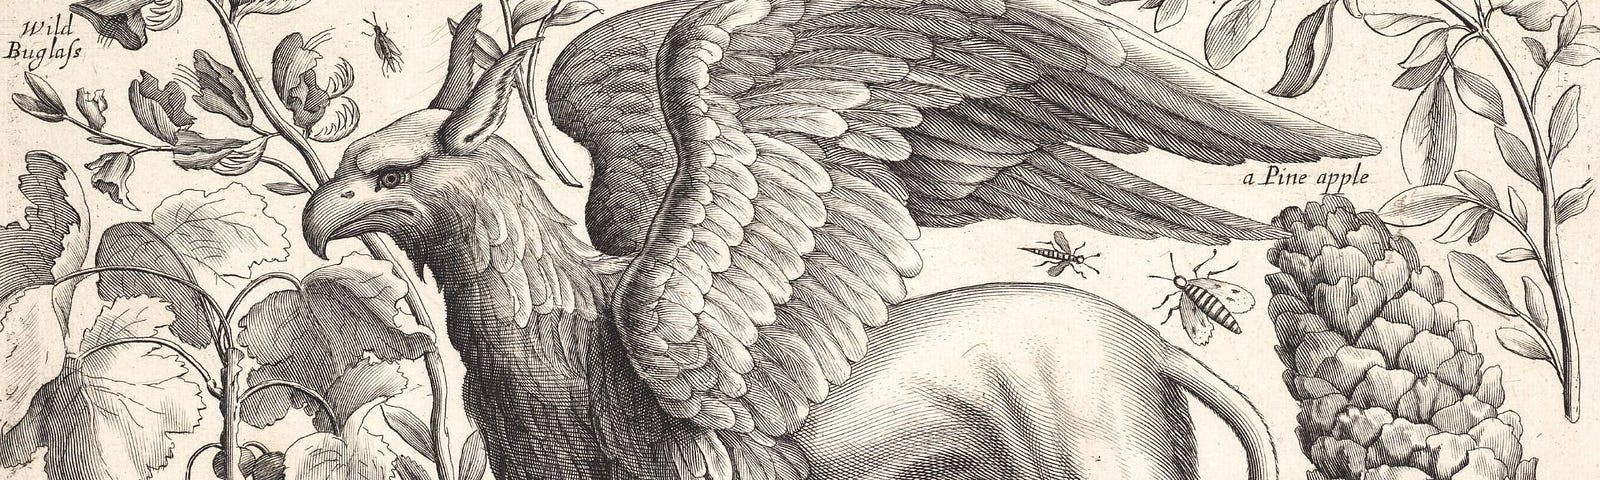 An intricate, vintage illustration of a griffin, a mythical creature with the body of a lion and the head and wings of an eagle, surrounded by detailed depictions of flora and insects, showcasing the artistic imagination in ancient mythology